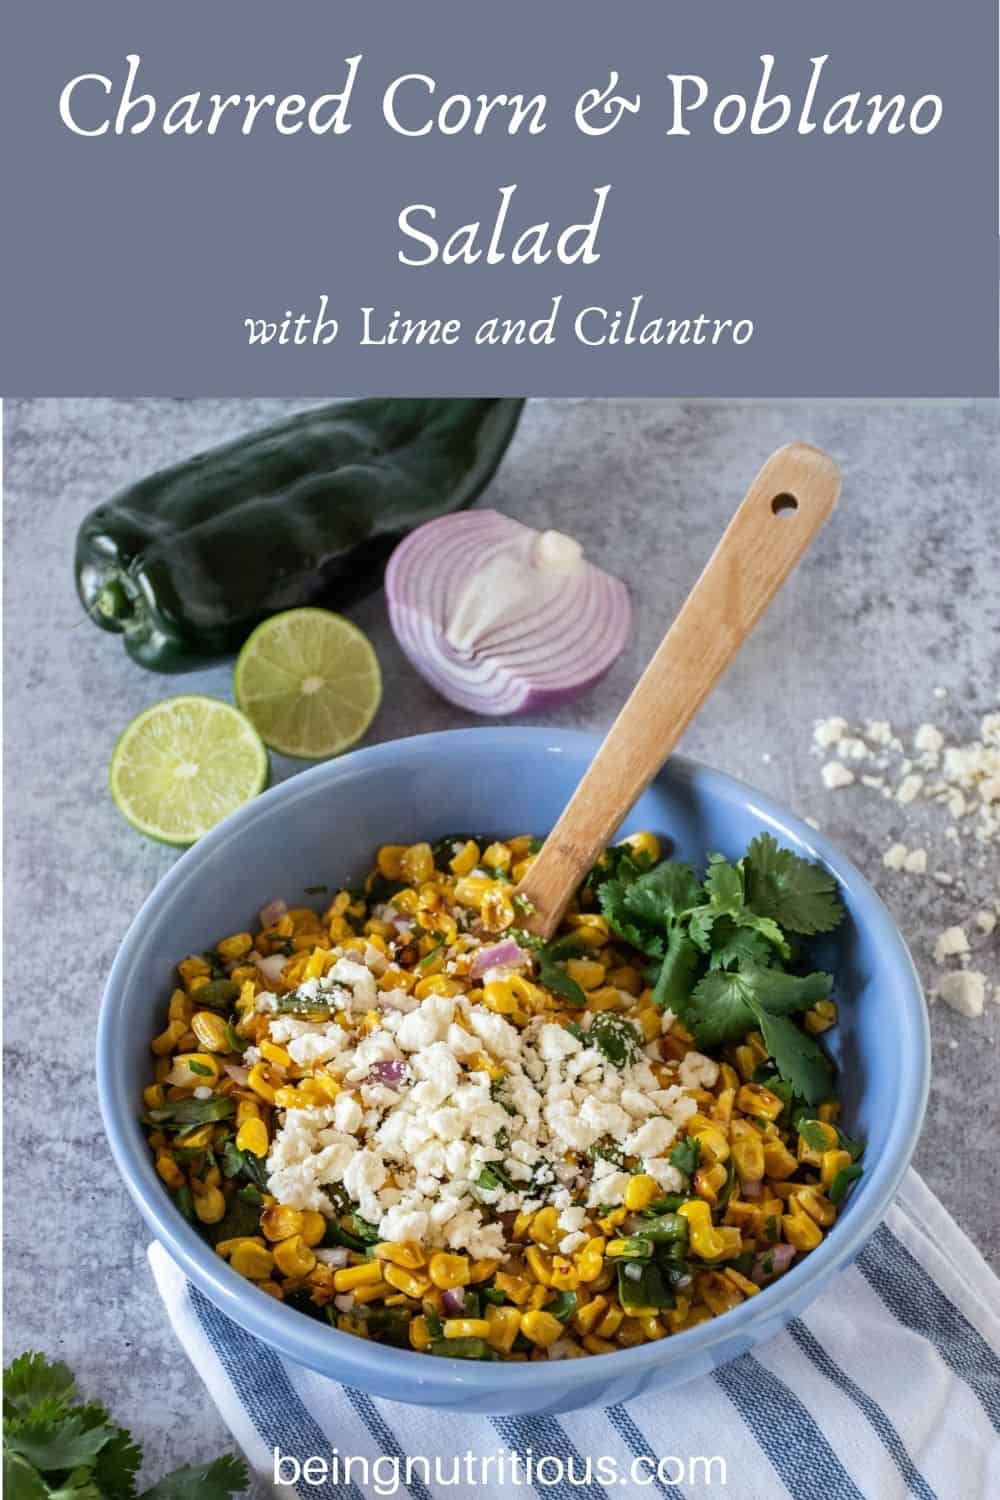 Corn salad in a bowl. Text overlay: Charred Corn & Poblano Salad with Lime and Cilantro.